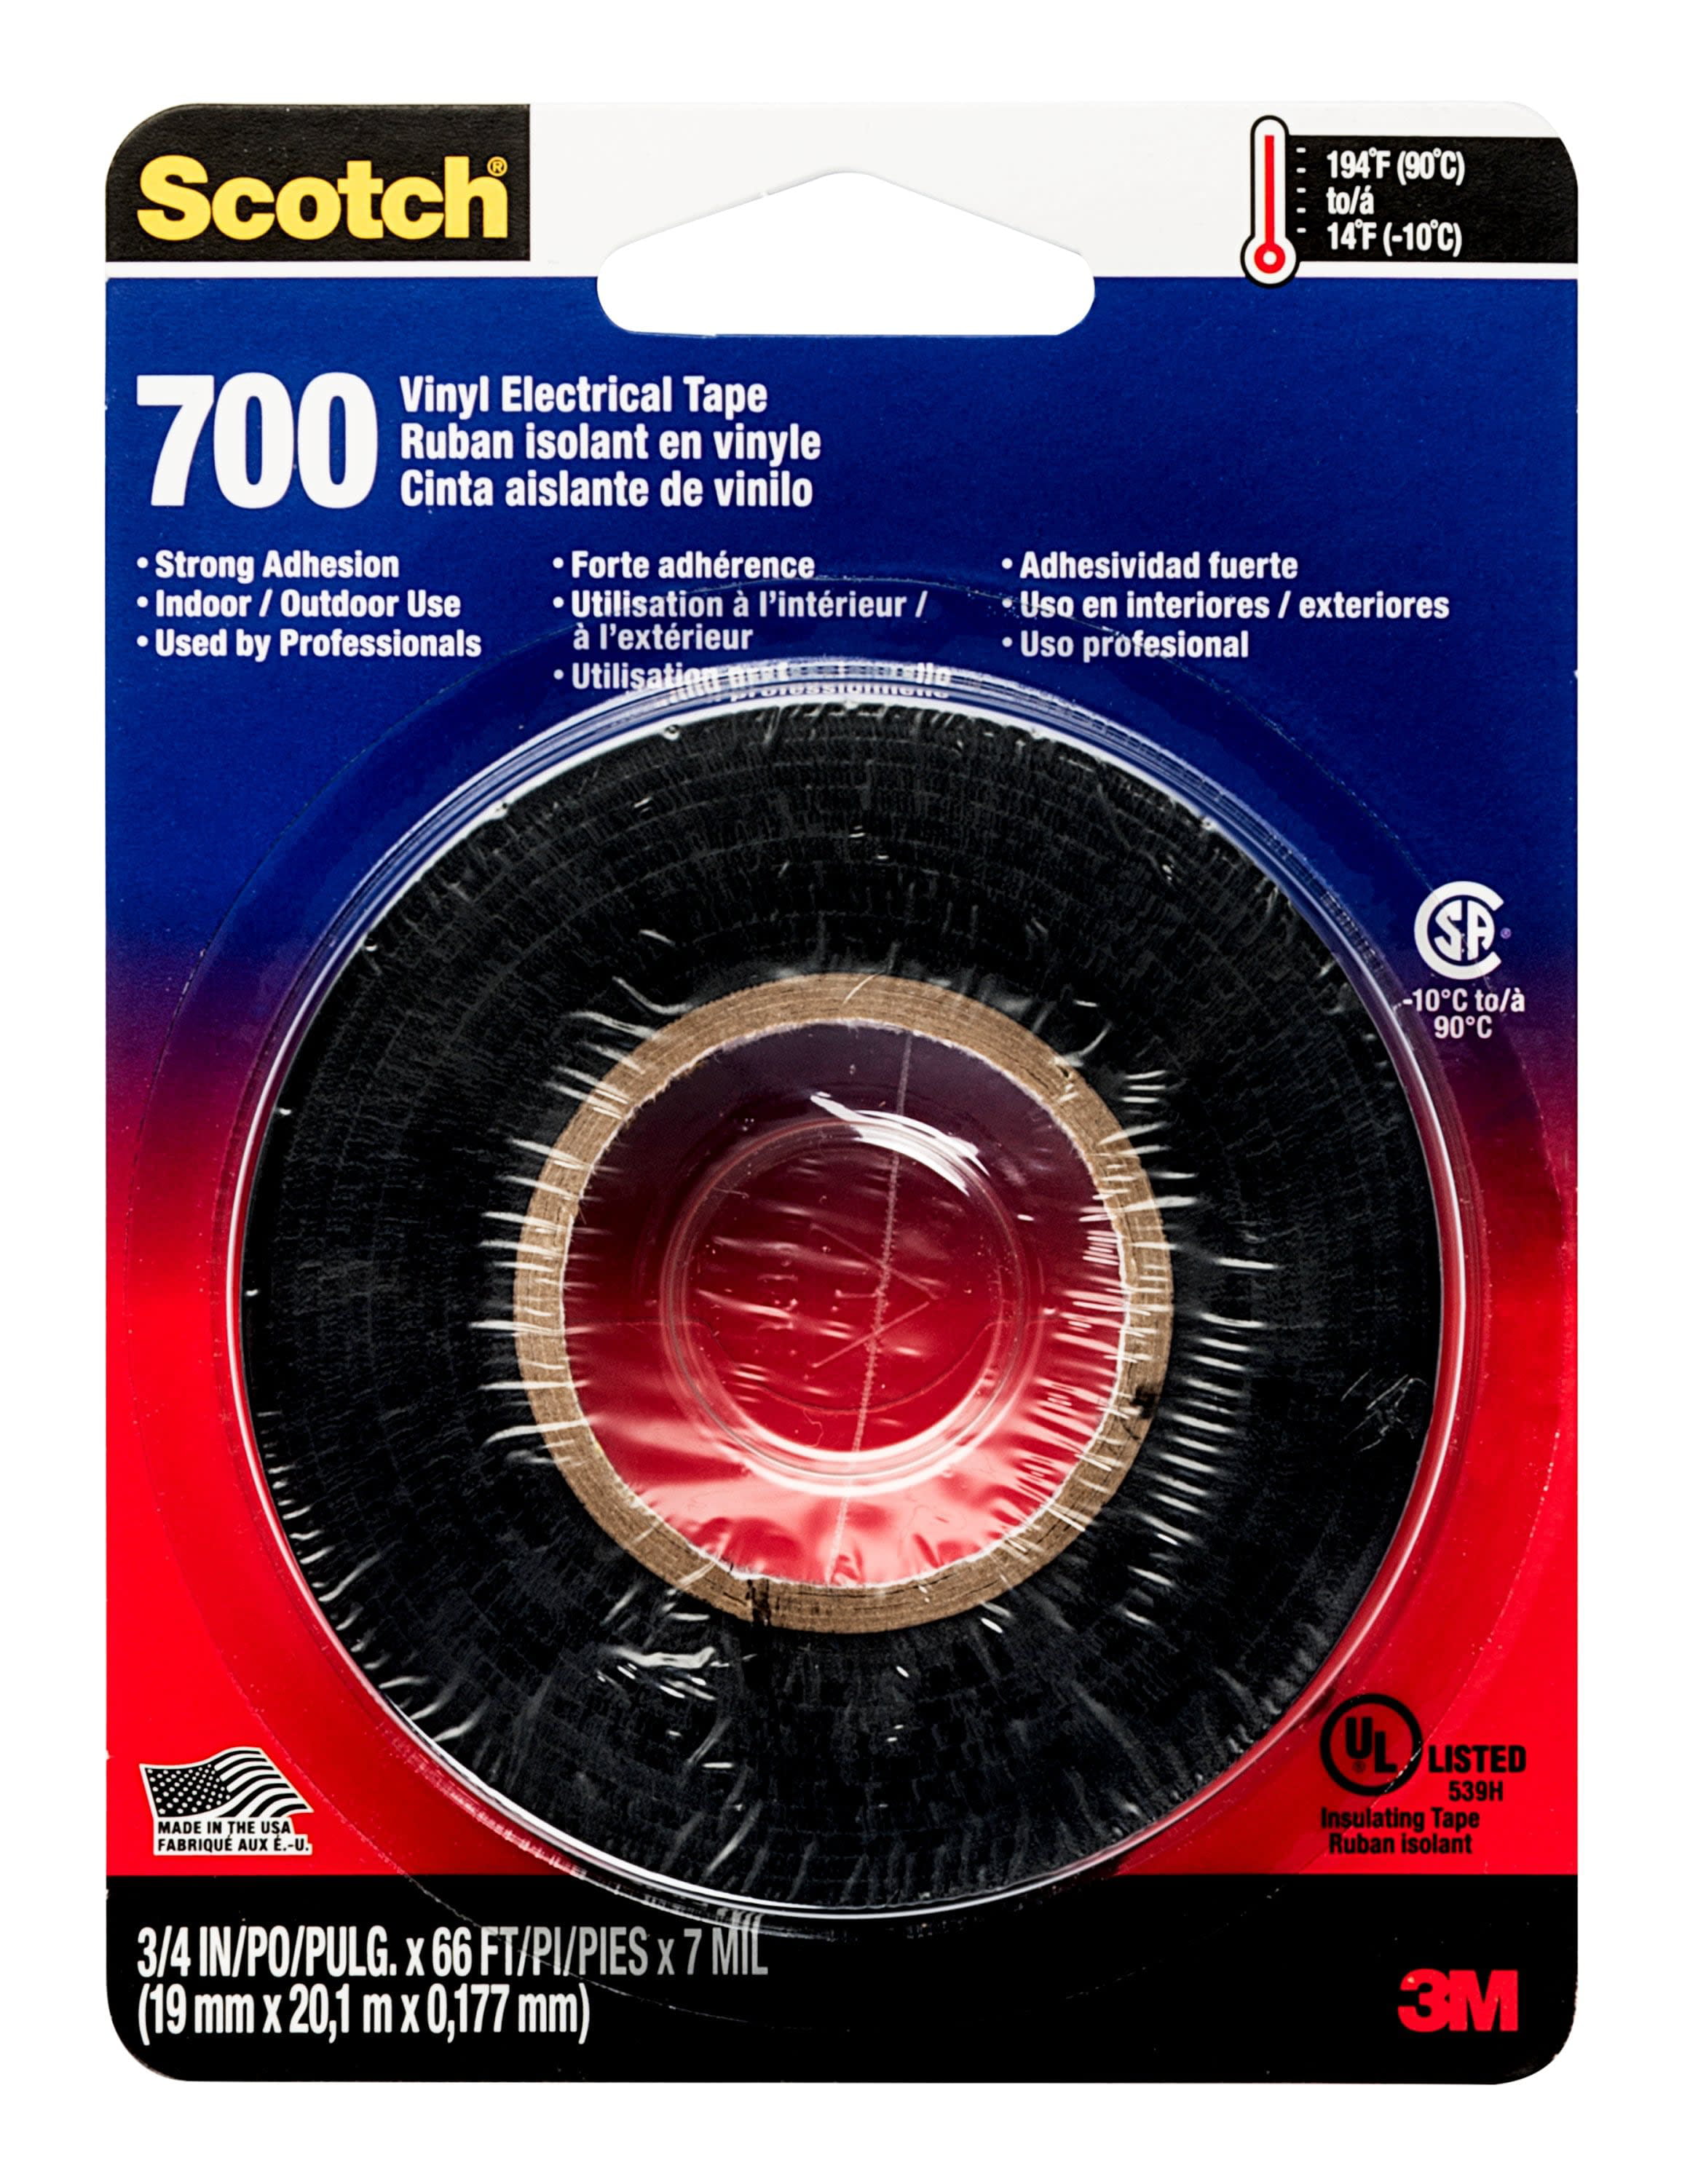 Scotch 700 Electrical Tape 66 ft Electrical Tape Interior Exterior Protective 